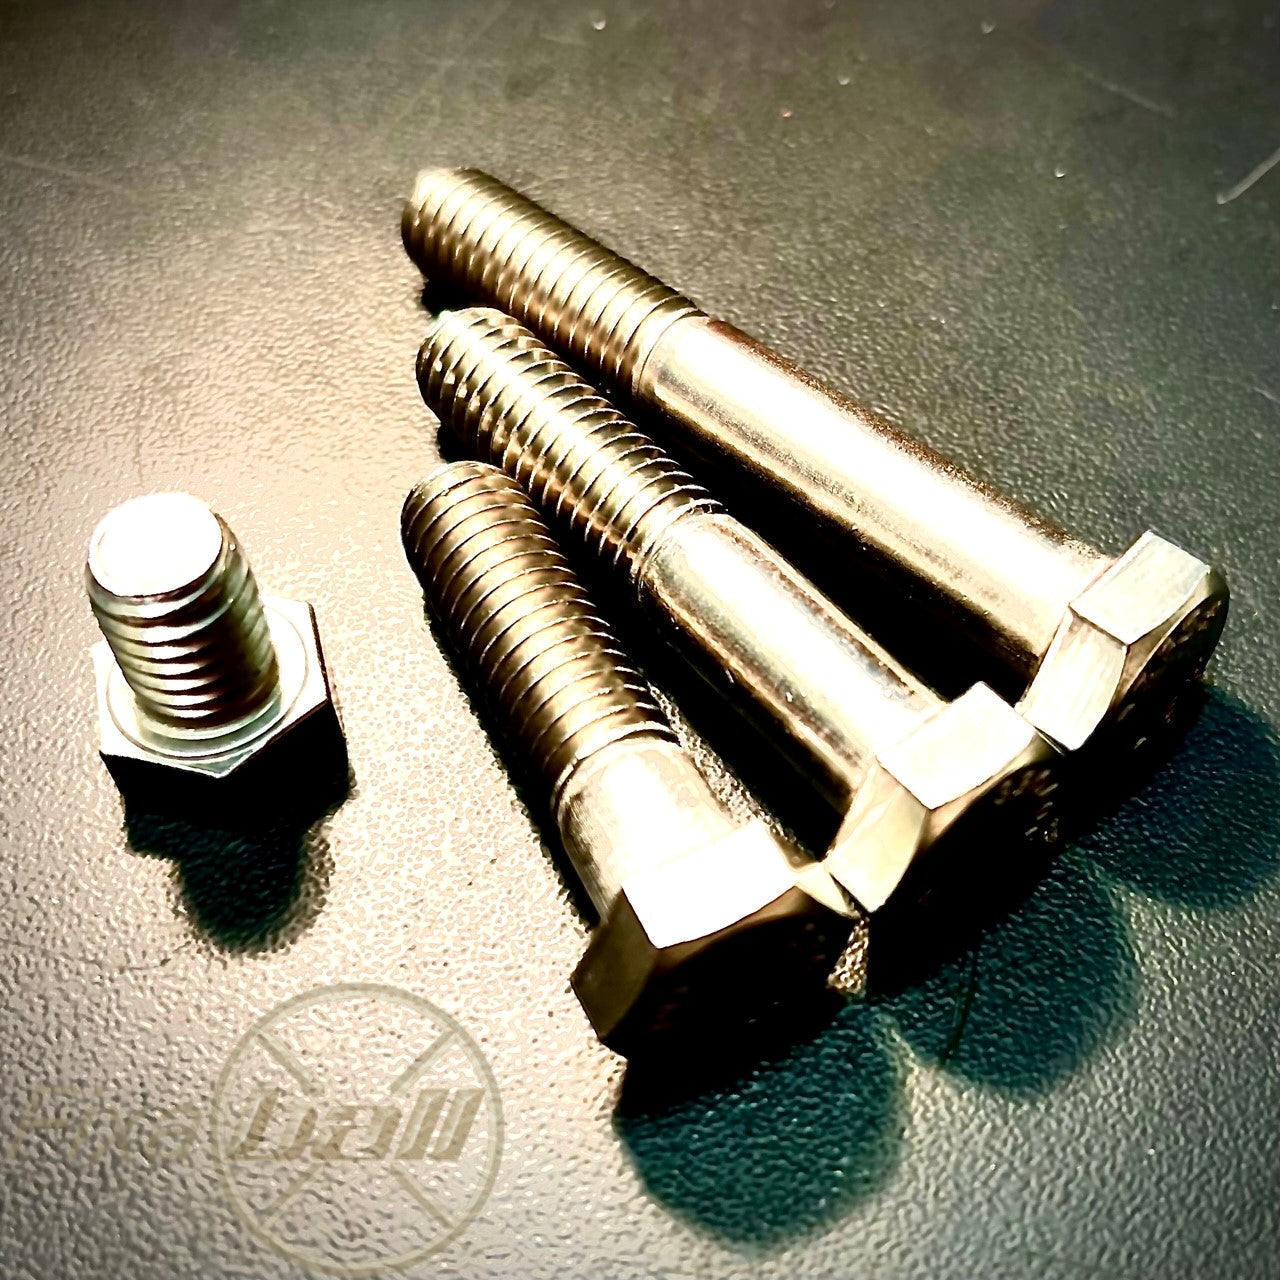 UNC 3/4", Hex Bolt and Hex Set Screw, A2/ 304 Stainless Steel, DIN 931. Hex-Bolt UNC 3/4", Hex Bolt and Hex Set Screw, A2/ 304 Stainless Steel, DIN 931. UNC, Hex-Bolt